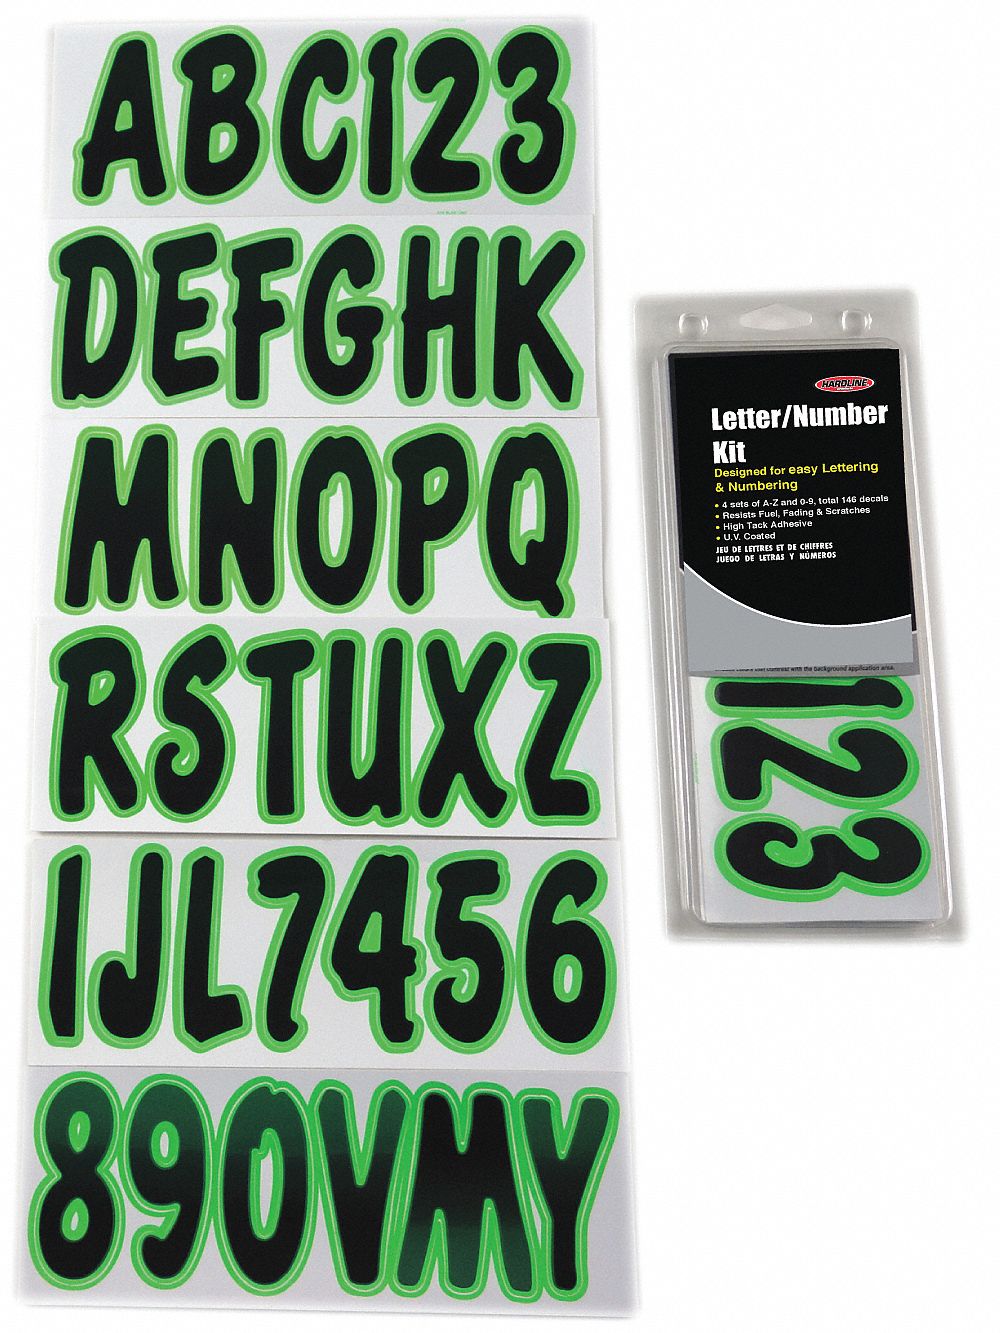 HARDLINE PRODUCTS Number and Letter Combo Kit, A Thru Z, 0 Thru 9, Black/Green, 3" Character Height, 1 EA   Letters and Numbers   48FV35|GBLKKI200